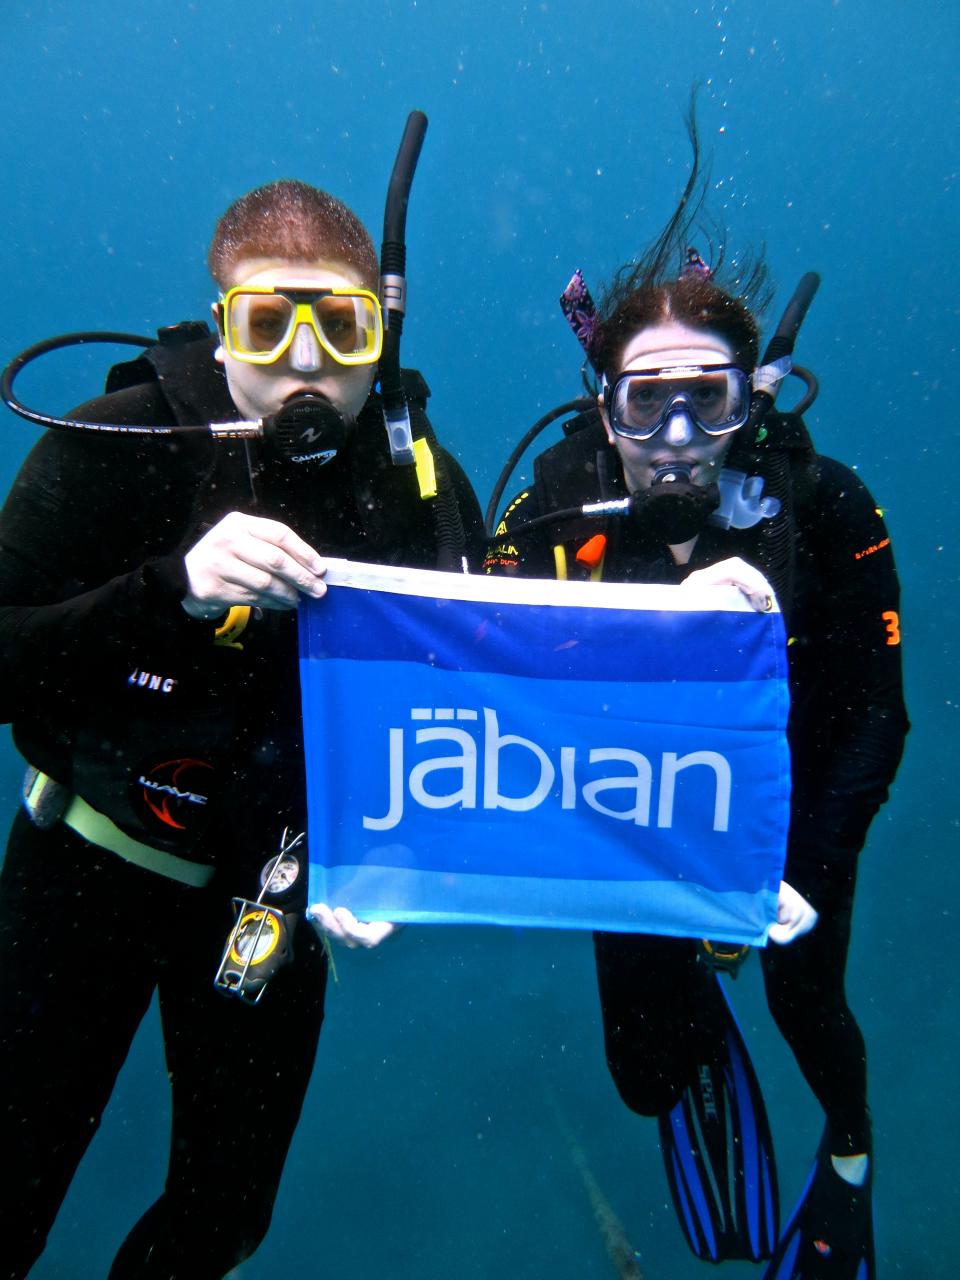 Diving with the Jabian Flag in Australia